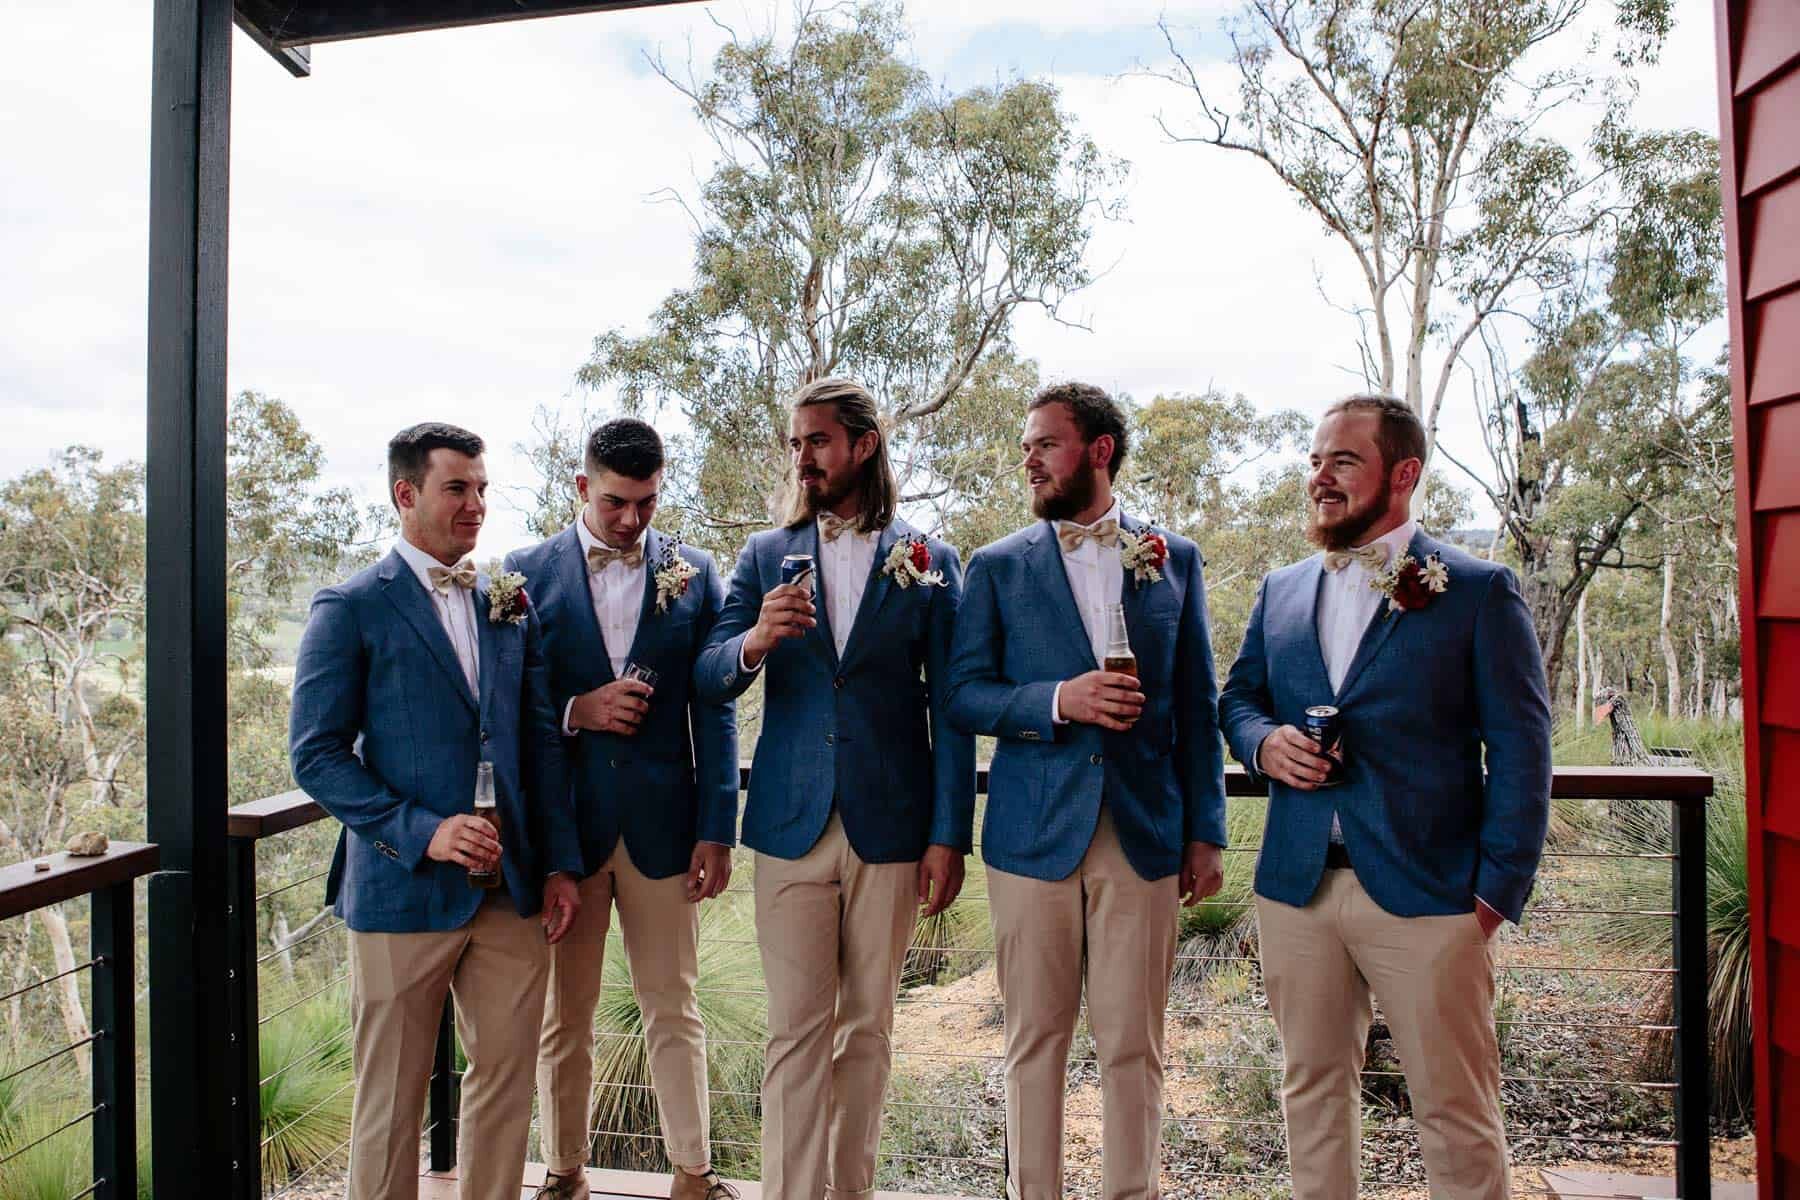 Groomsmen wear navy blazers with red rose Navy blazer with gold bowtie and red rose boutonnière